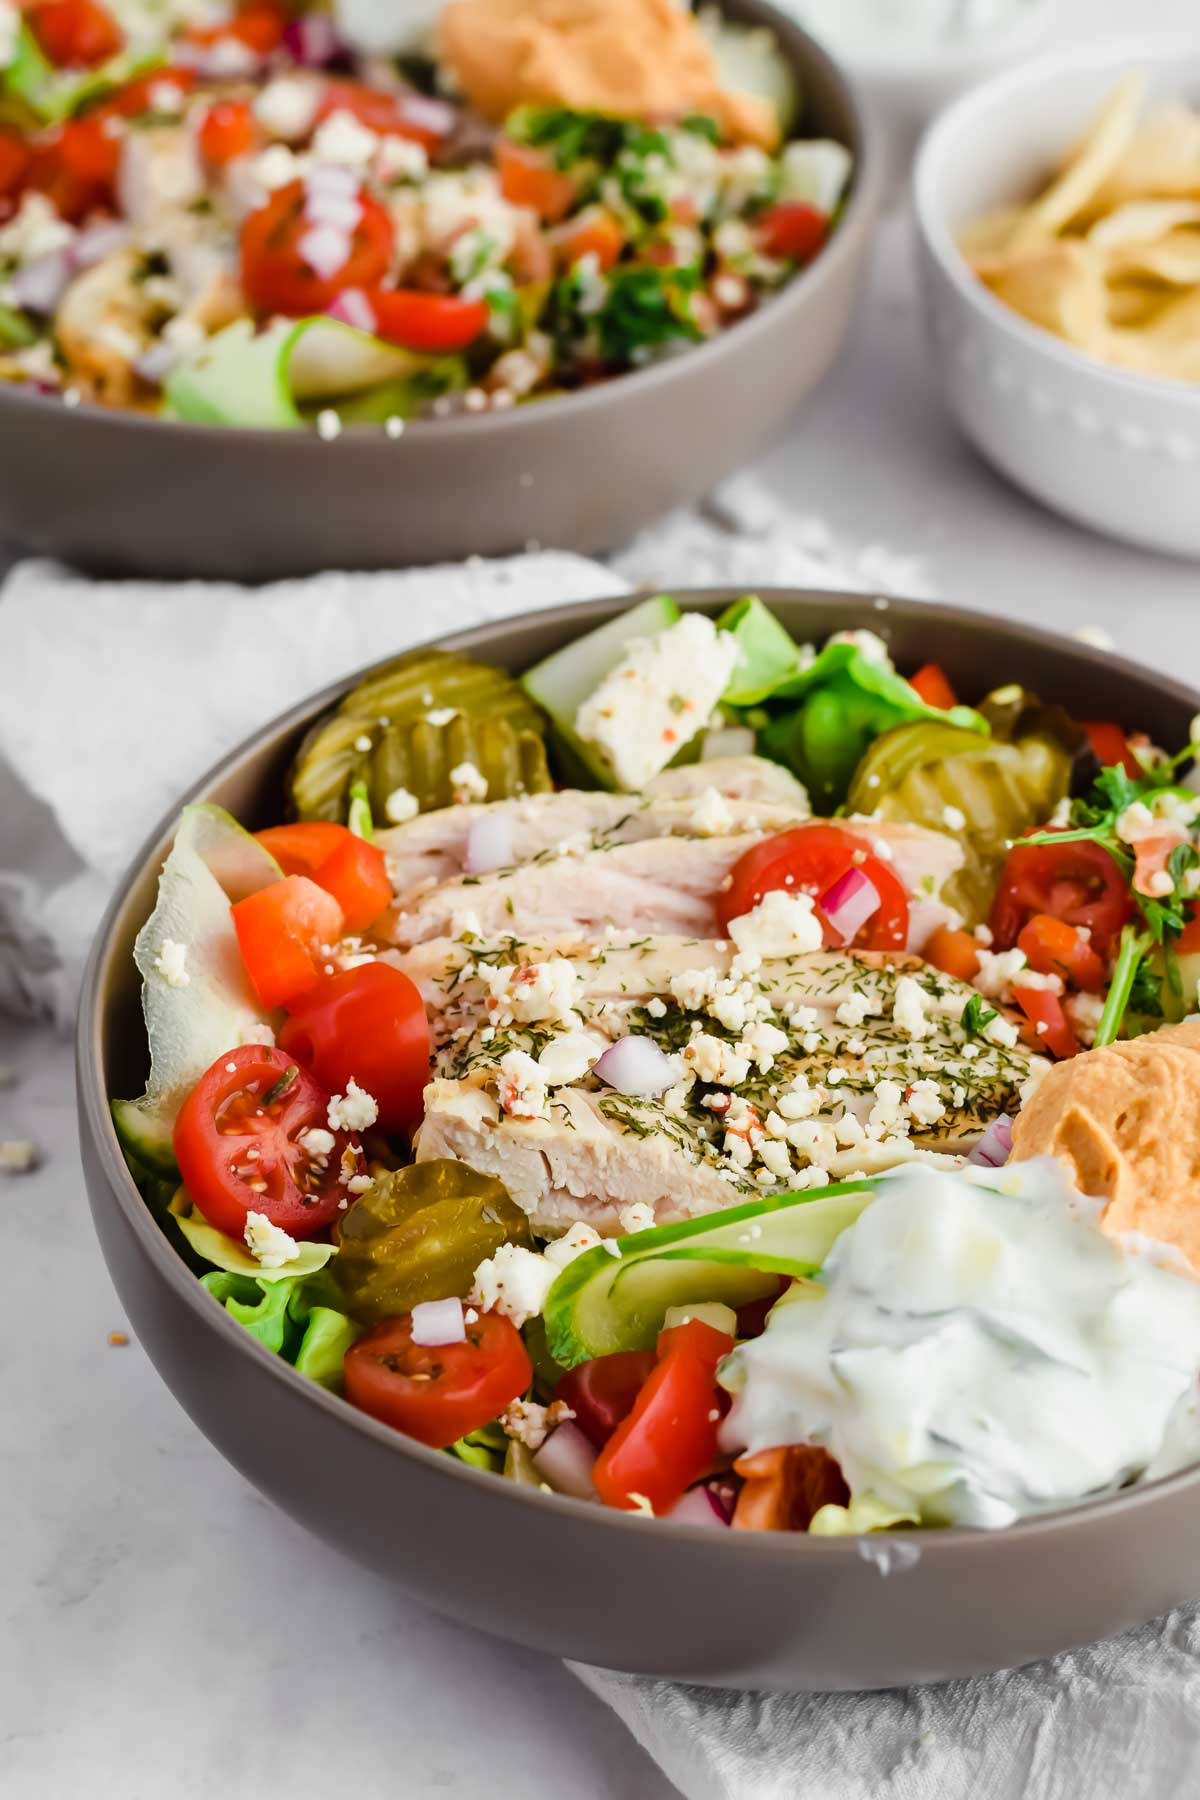 loaded Mediterranean salad with chicken, pita, tomatoes, red onions, pickles, hummus, tabbouleh, and tzatziki.